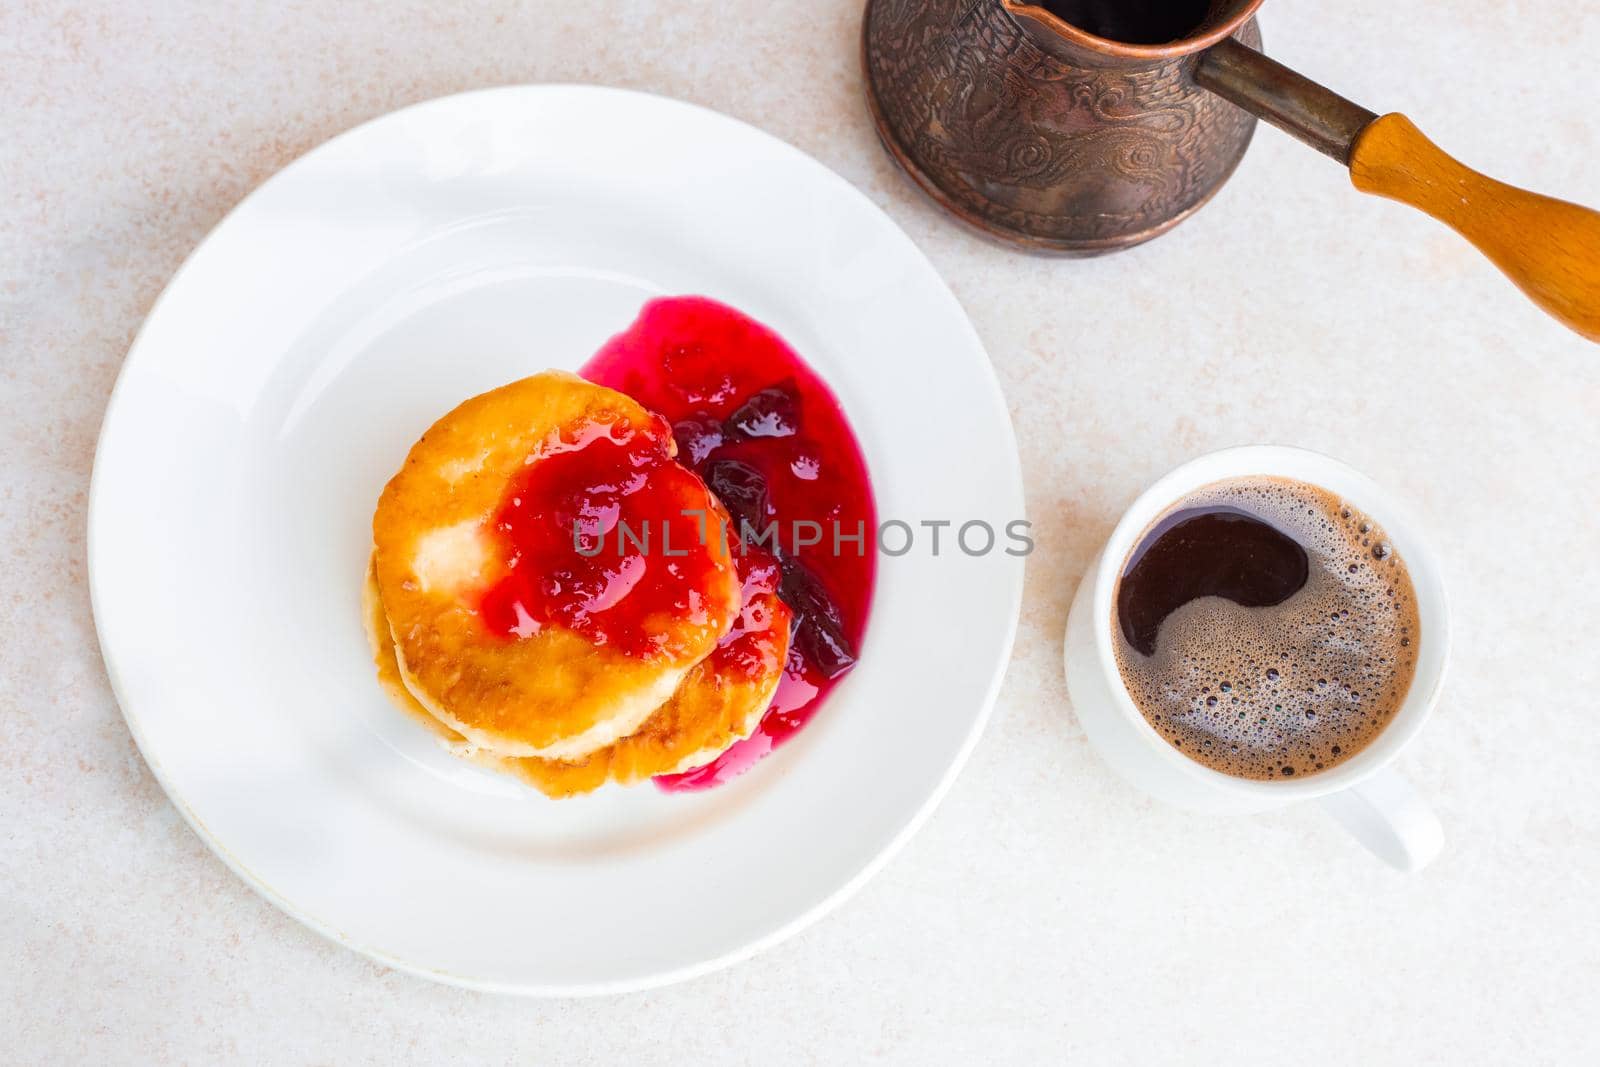 Fresh cheese cakes with plum jam and a mug with freshly brewed coffee on a light table top, top view. Wake up in the morning, start a new day. Hearty breakfast.